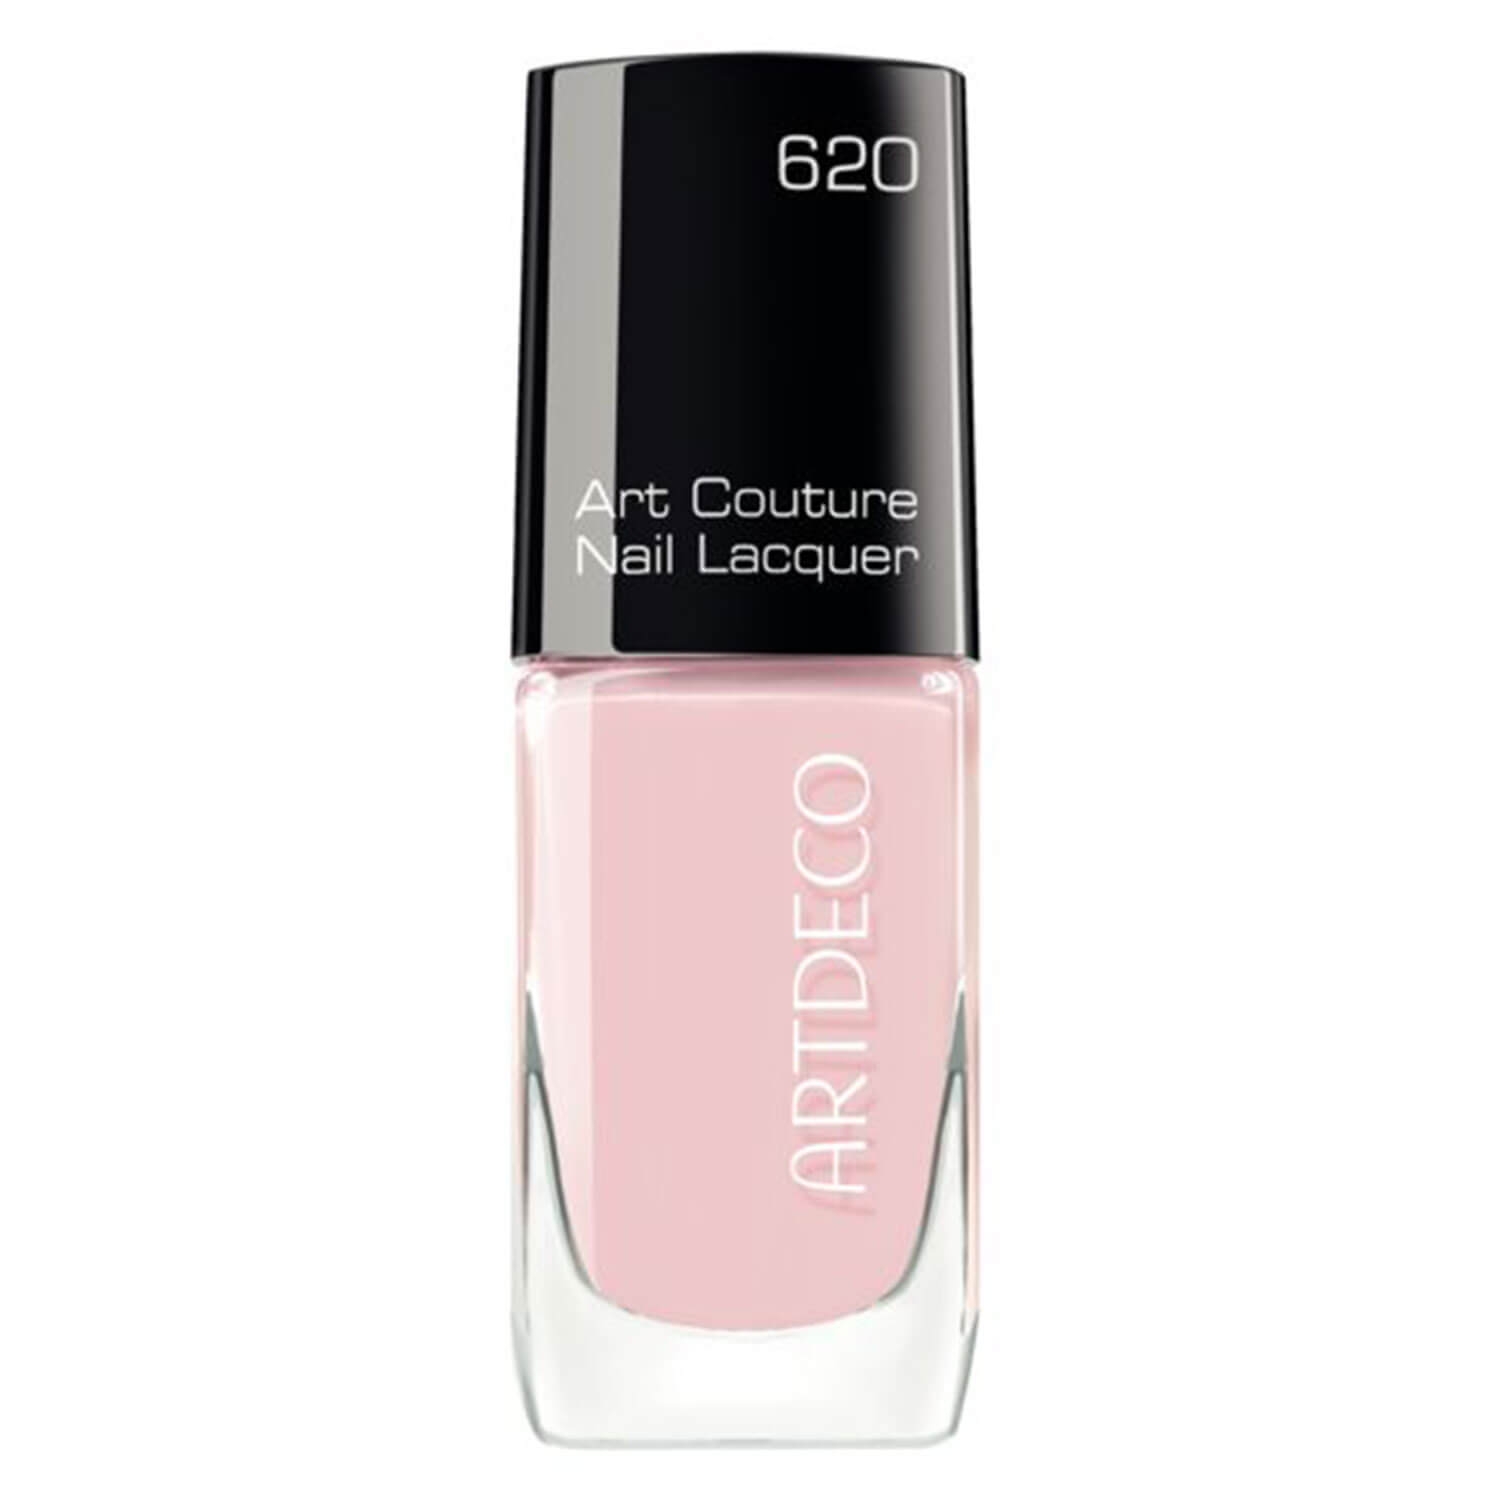 Product image from Art Couture - Nail Lacquer Sheer Rose 620